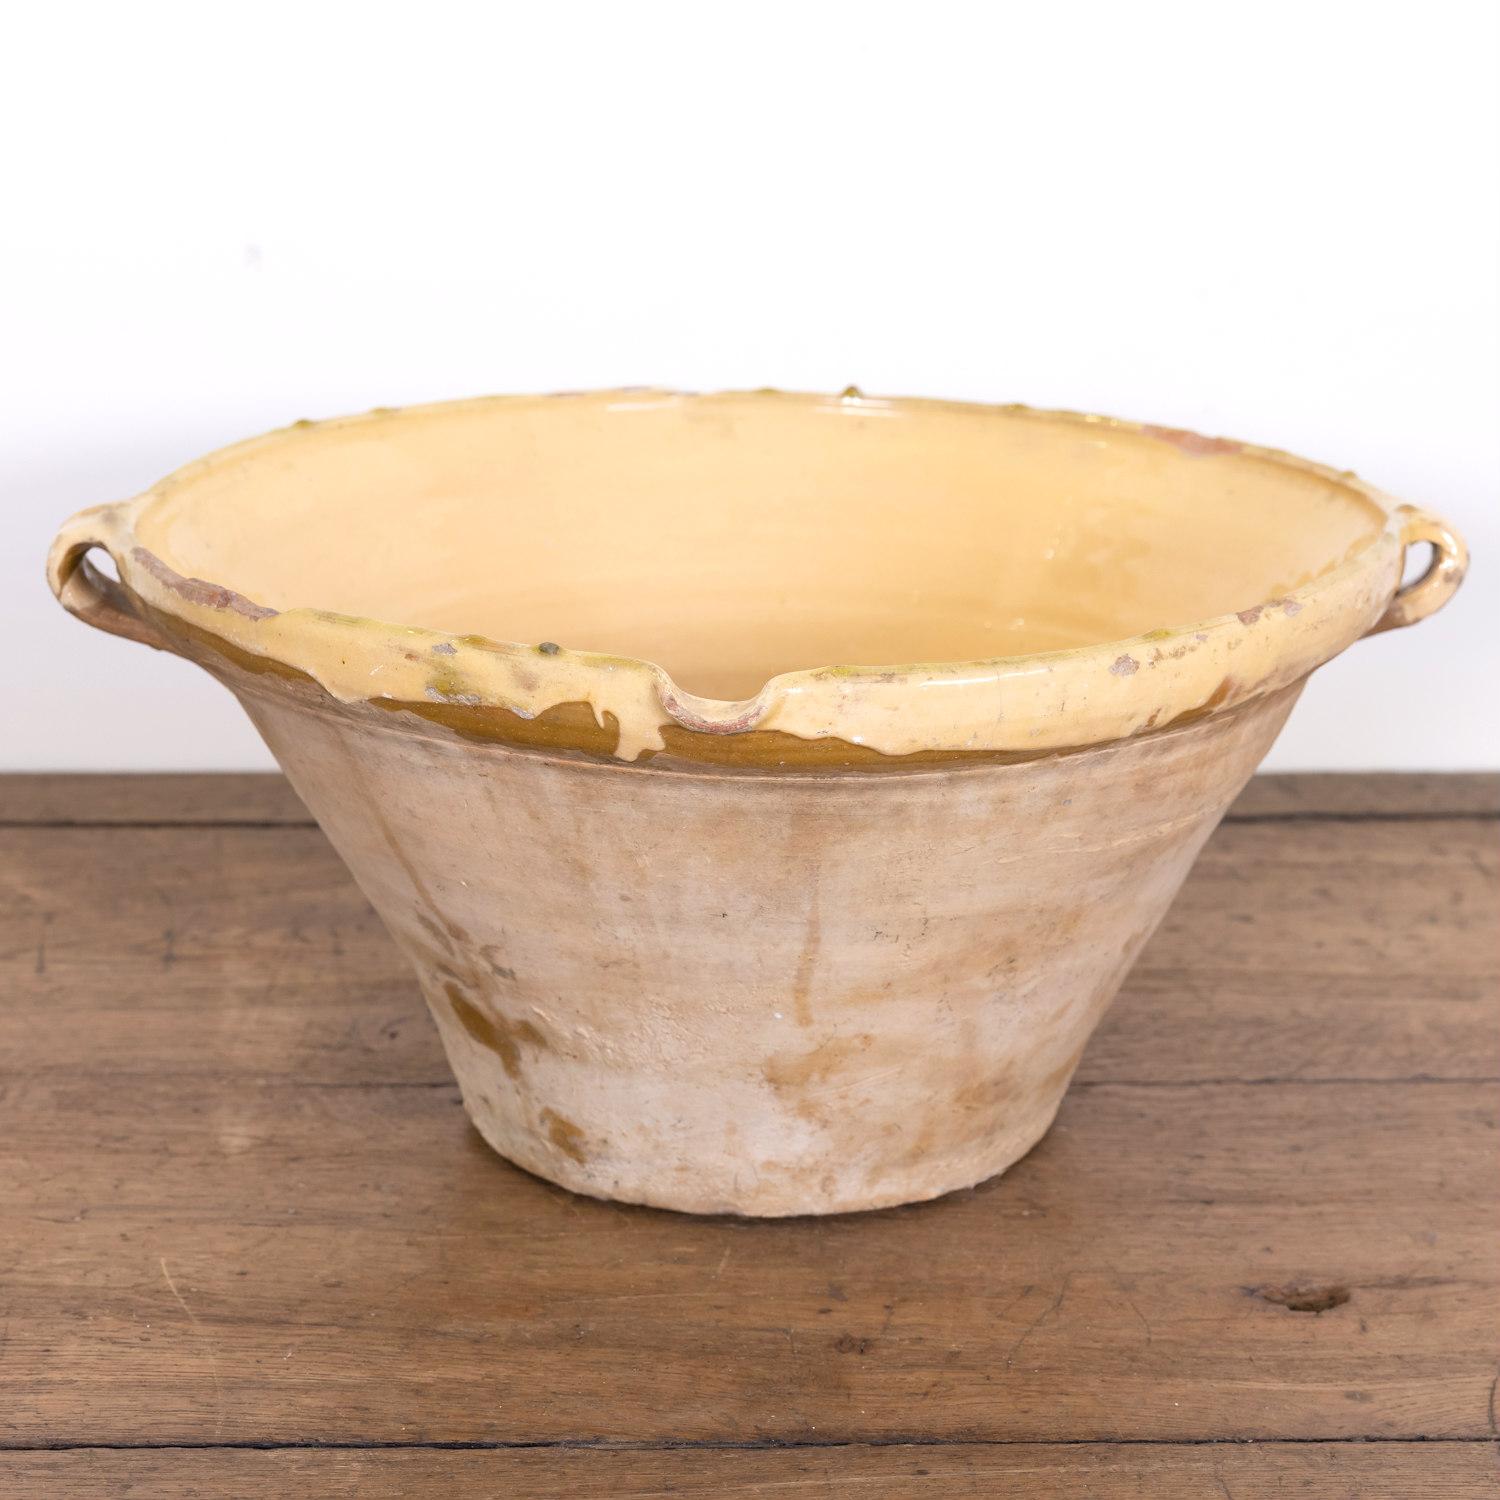 A 19th century French tian bowl complete with both handles and pouring spout having an unglazed pale terracotta exterior and a beautiful honey yellow glaze to the interior and lip, circa 1890s. Tian bowls, which are basically earthenware mixing